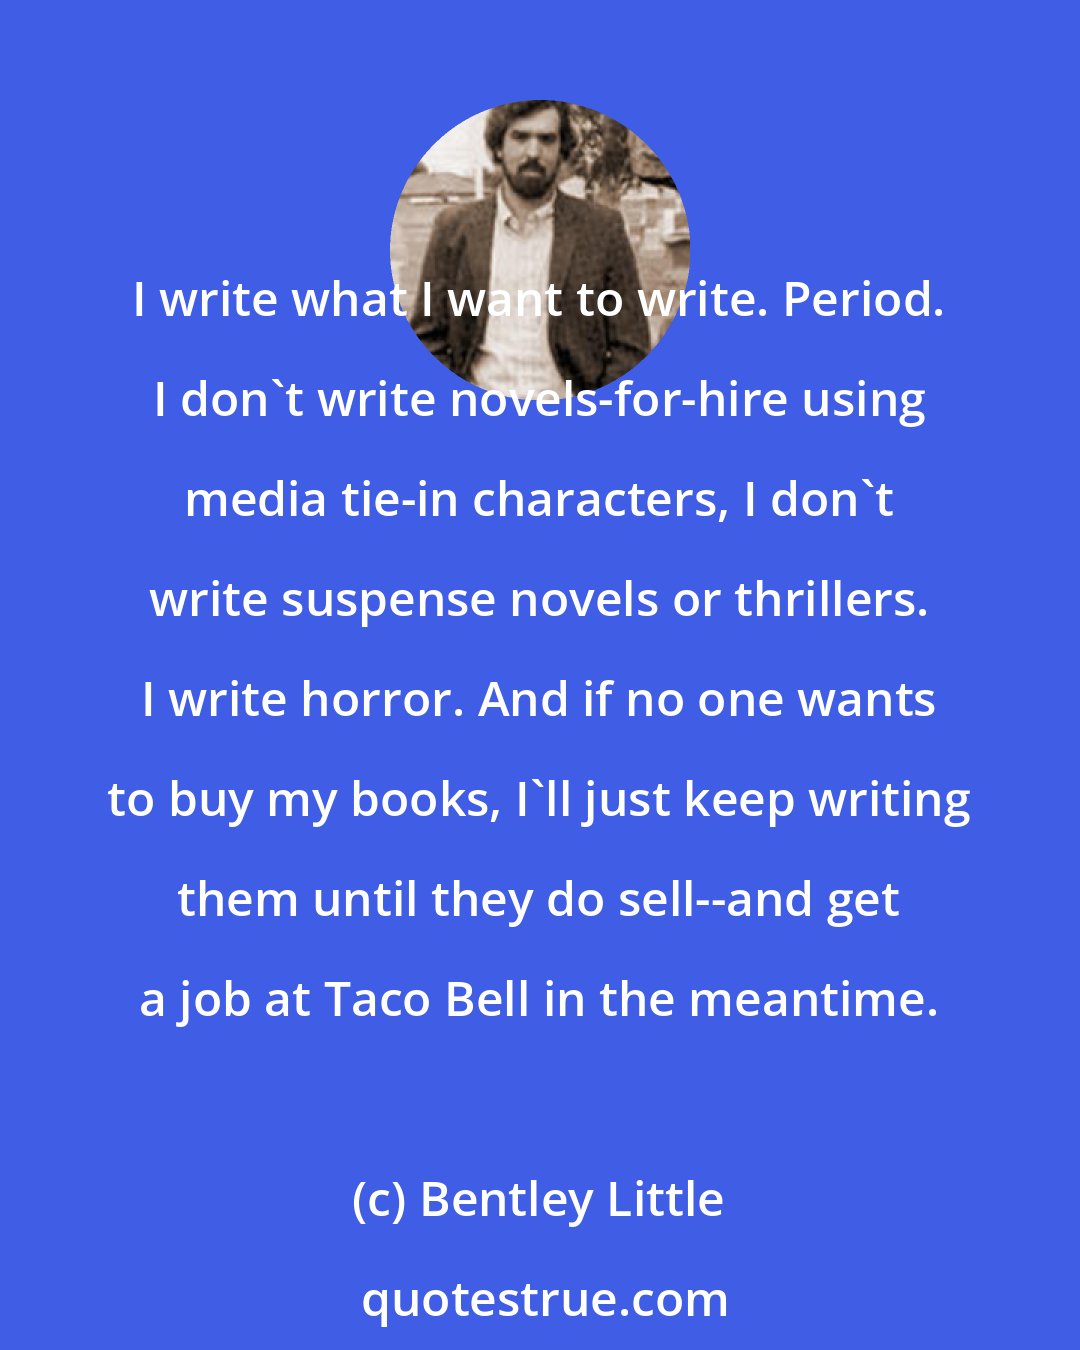 Bentley Little: I write what I want to write. Period. I don't write novels-for-hire using media tie-in characters, I don't write suspense novels or thrillers. I write horror. And if no one wants to buy my books, I'll just keep writing them until they do sell--and get a job at Taco Bell in the meantime.